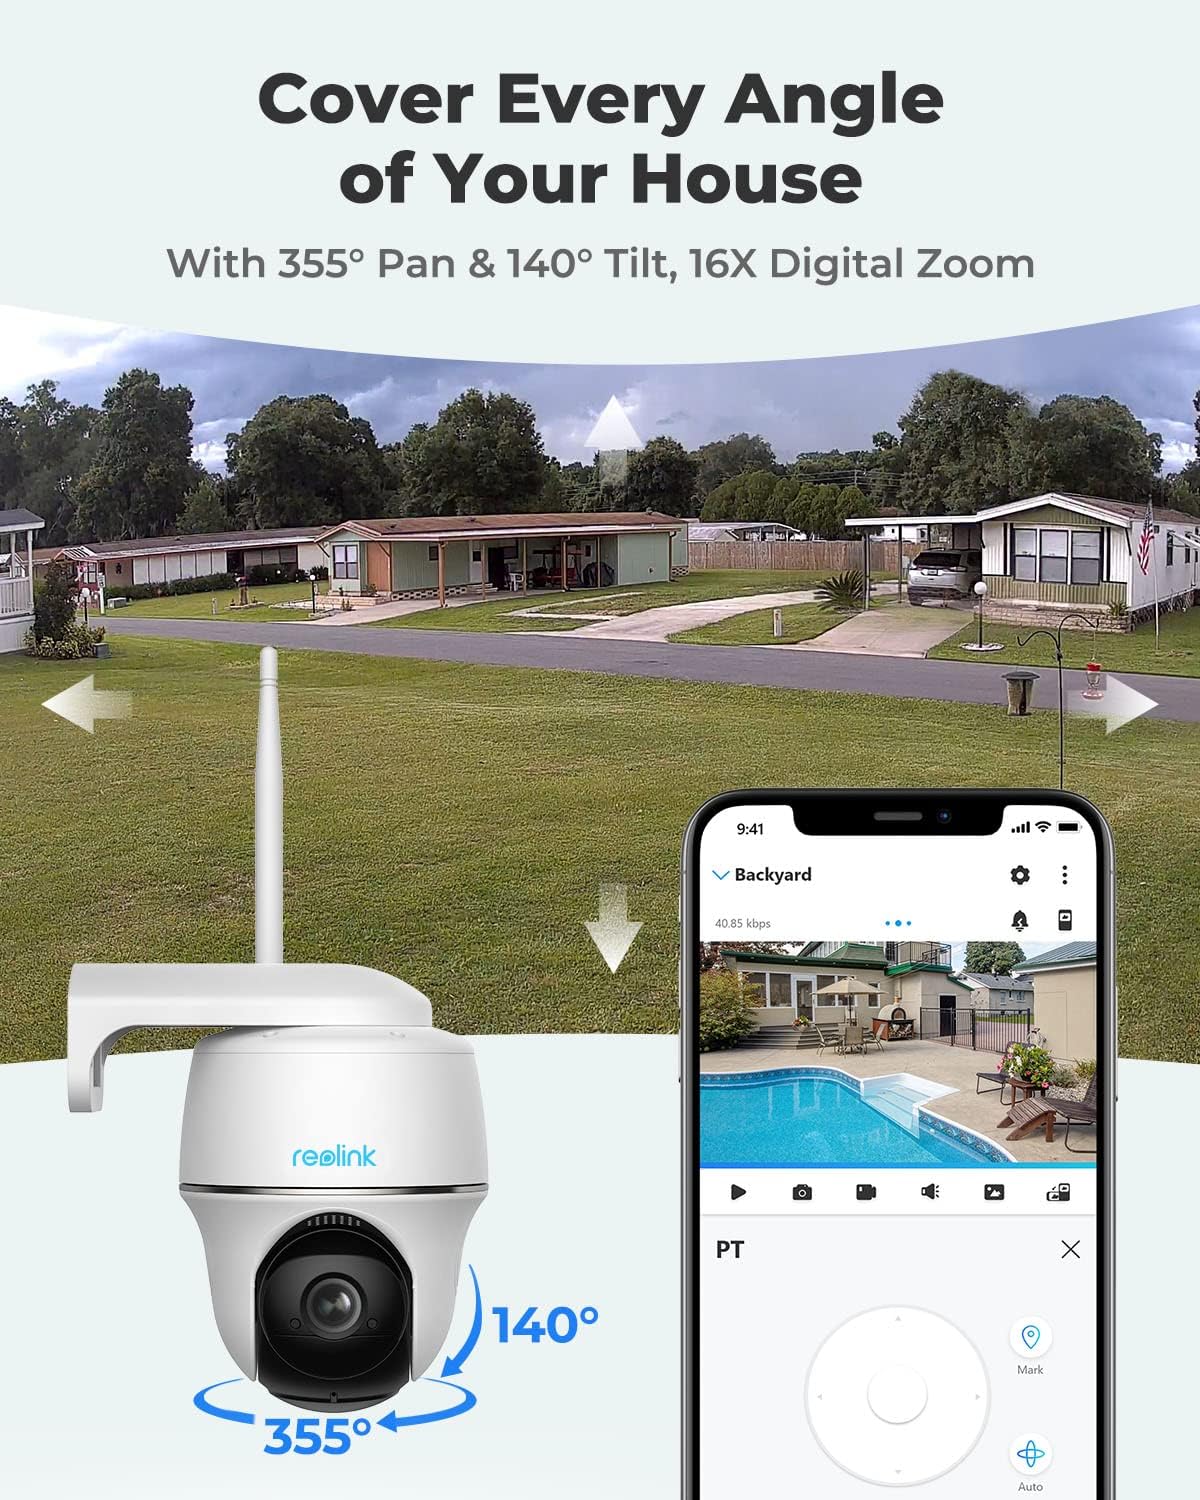 Reolink 4MP Solar Security Camera Outdoor Wireless, No Hub Needed, 2.4/5 GHz WiFi Solar Powered Camera with 360° Pan-Tilt, Person/Vehicle Detection, No Monthly Fee, SD Storage,Argus PT 4MP+Solar Panel (refurbished)